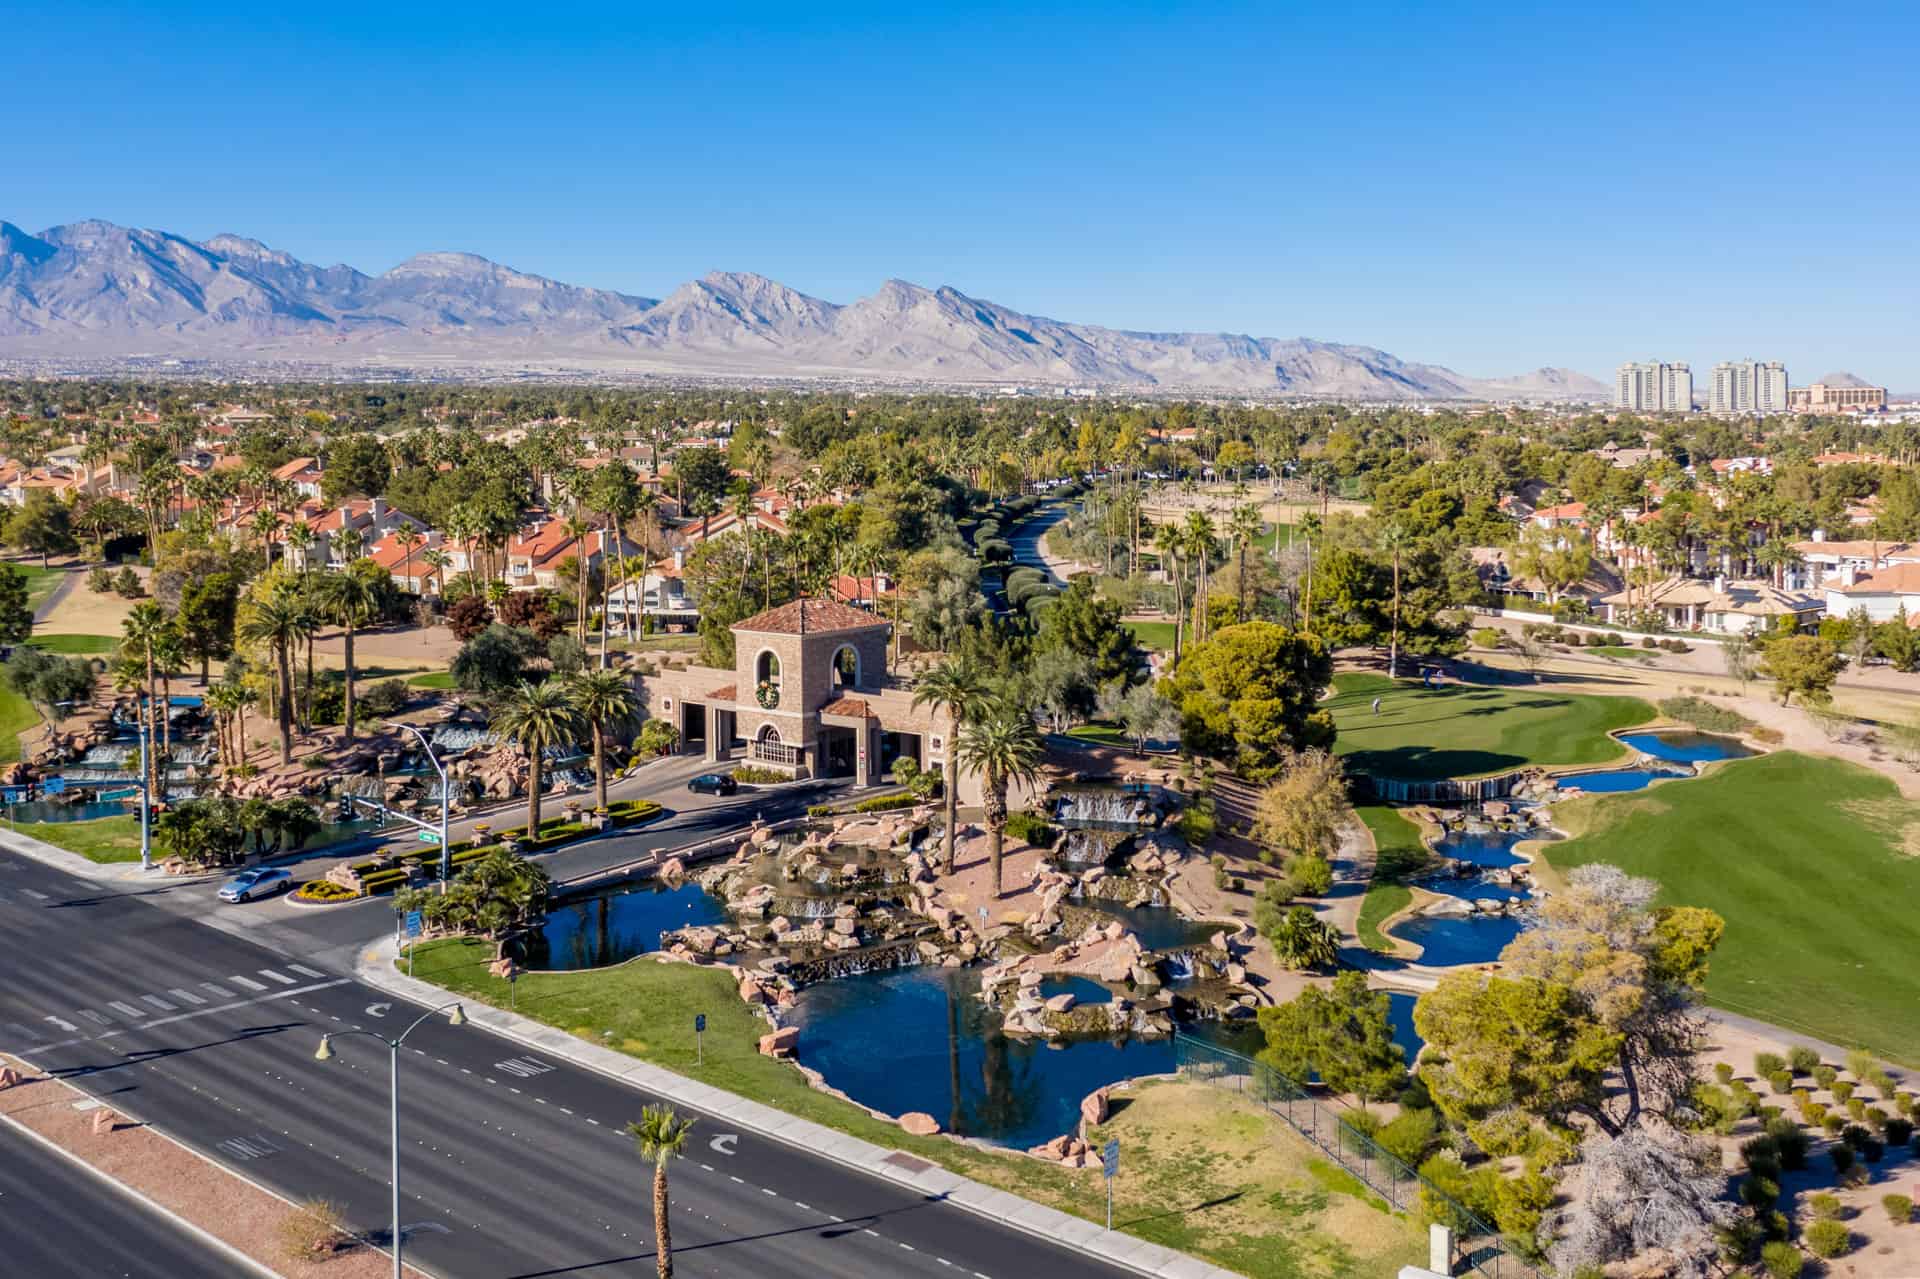 All About Summerlin’s Canyon Gate Country Club